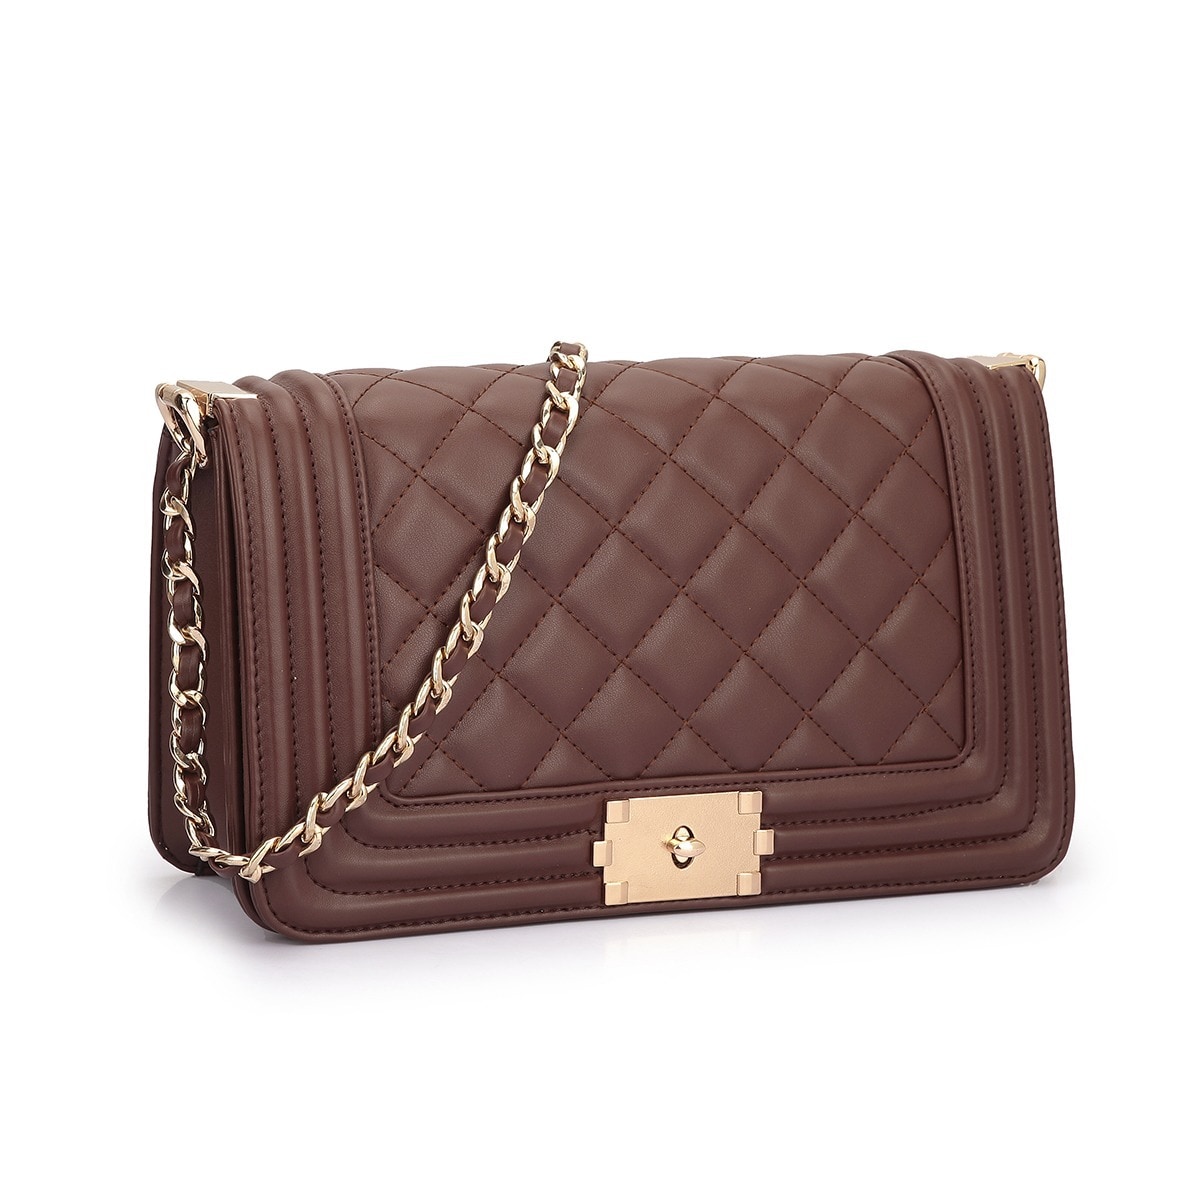 Dasein Quilted Crossbody Bag with Intertwined Leather Gold-Tone Chain Straps | eBay